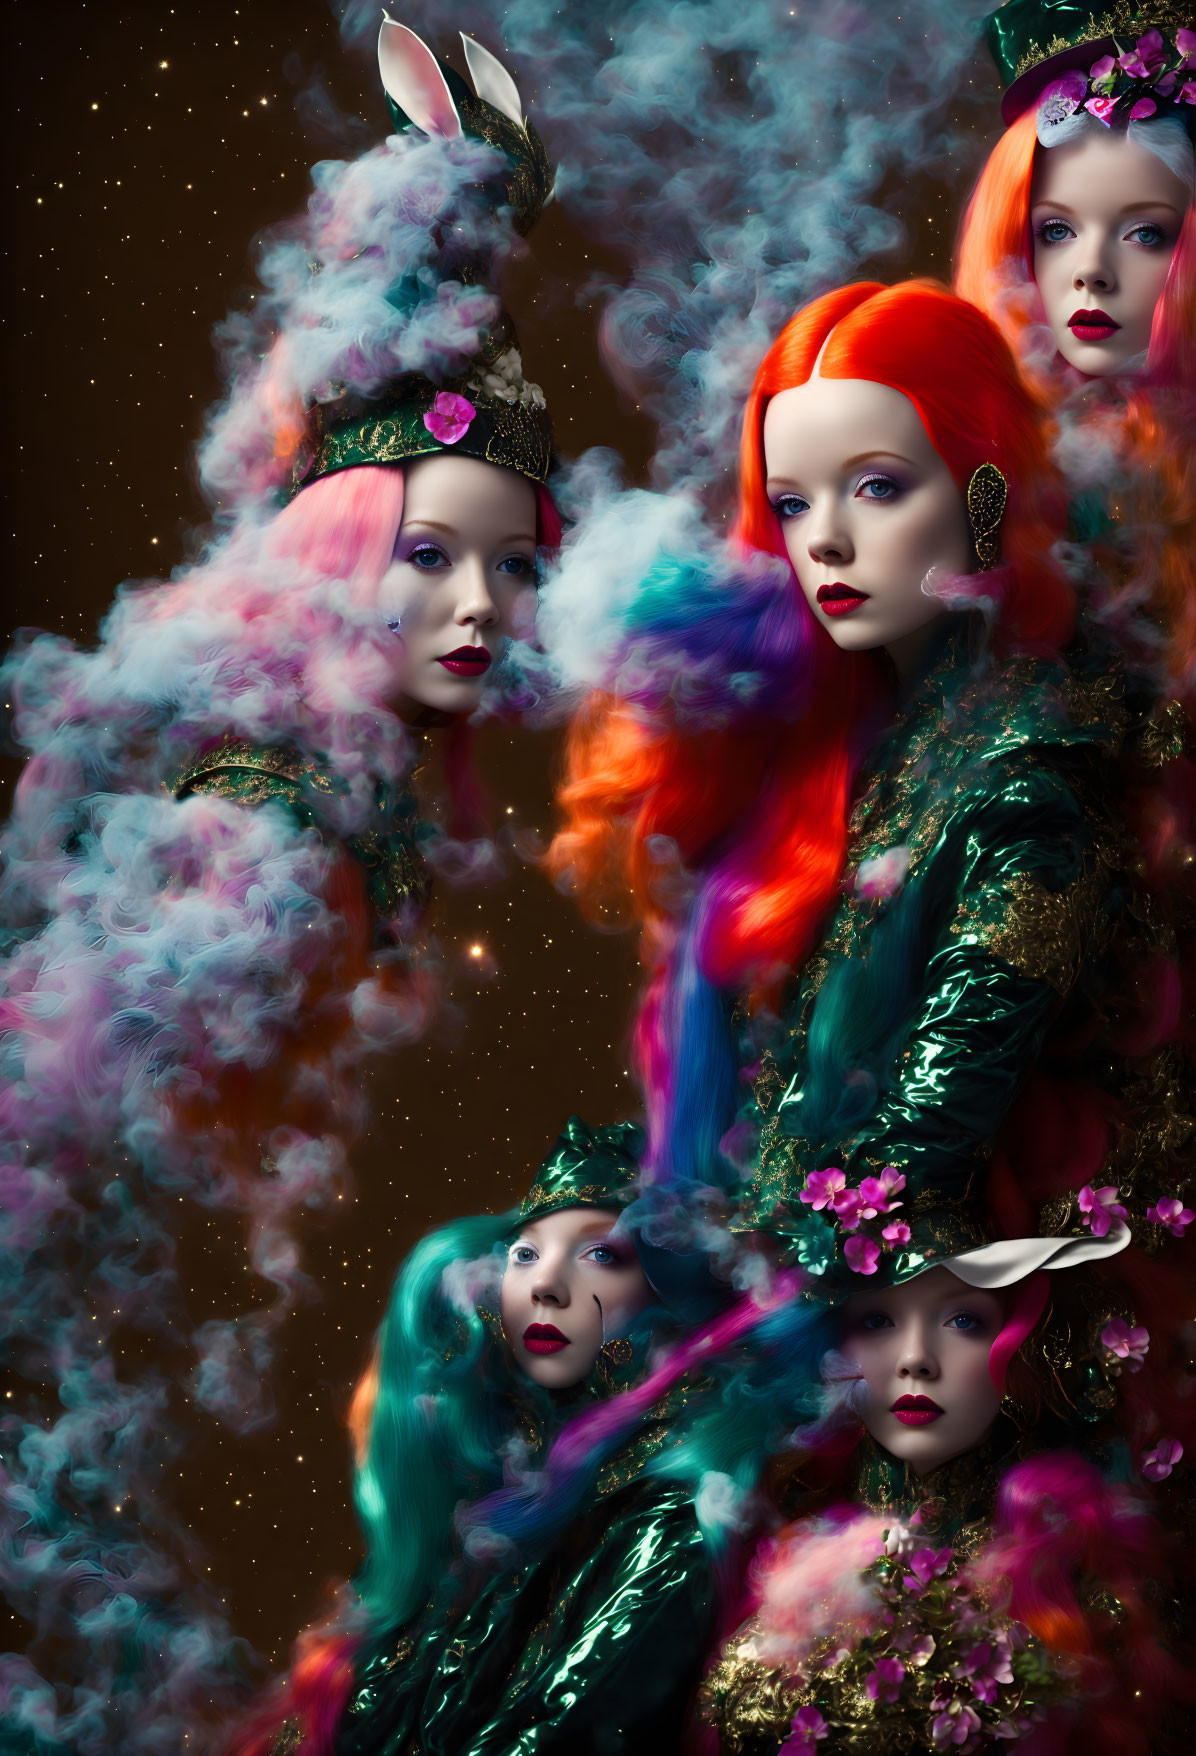 Four women in vibrant hair and floral attire amid colorful smoke on dark background